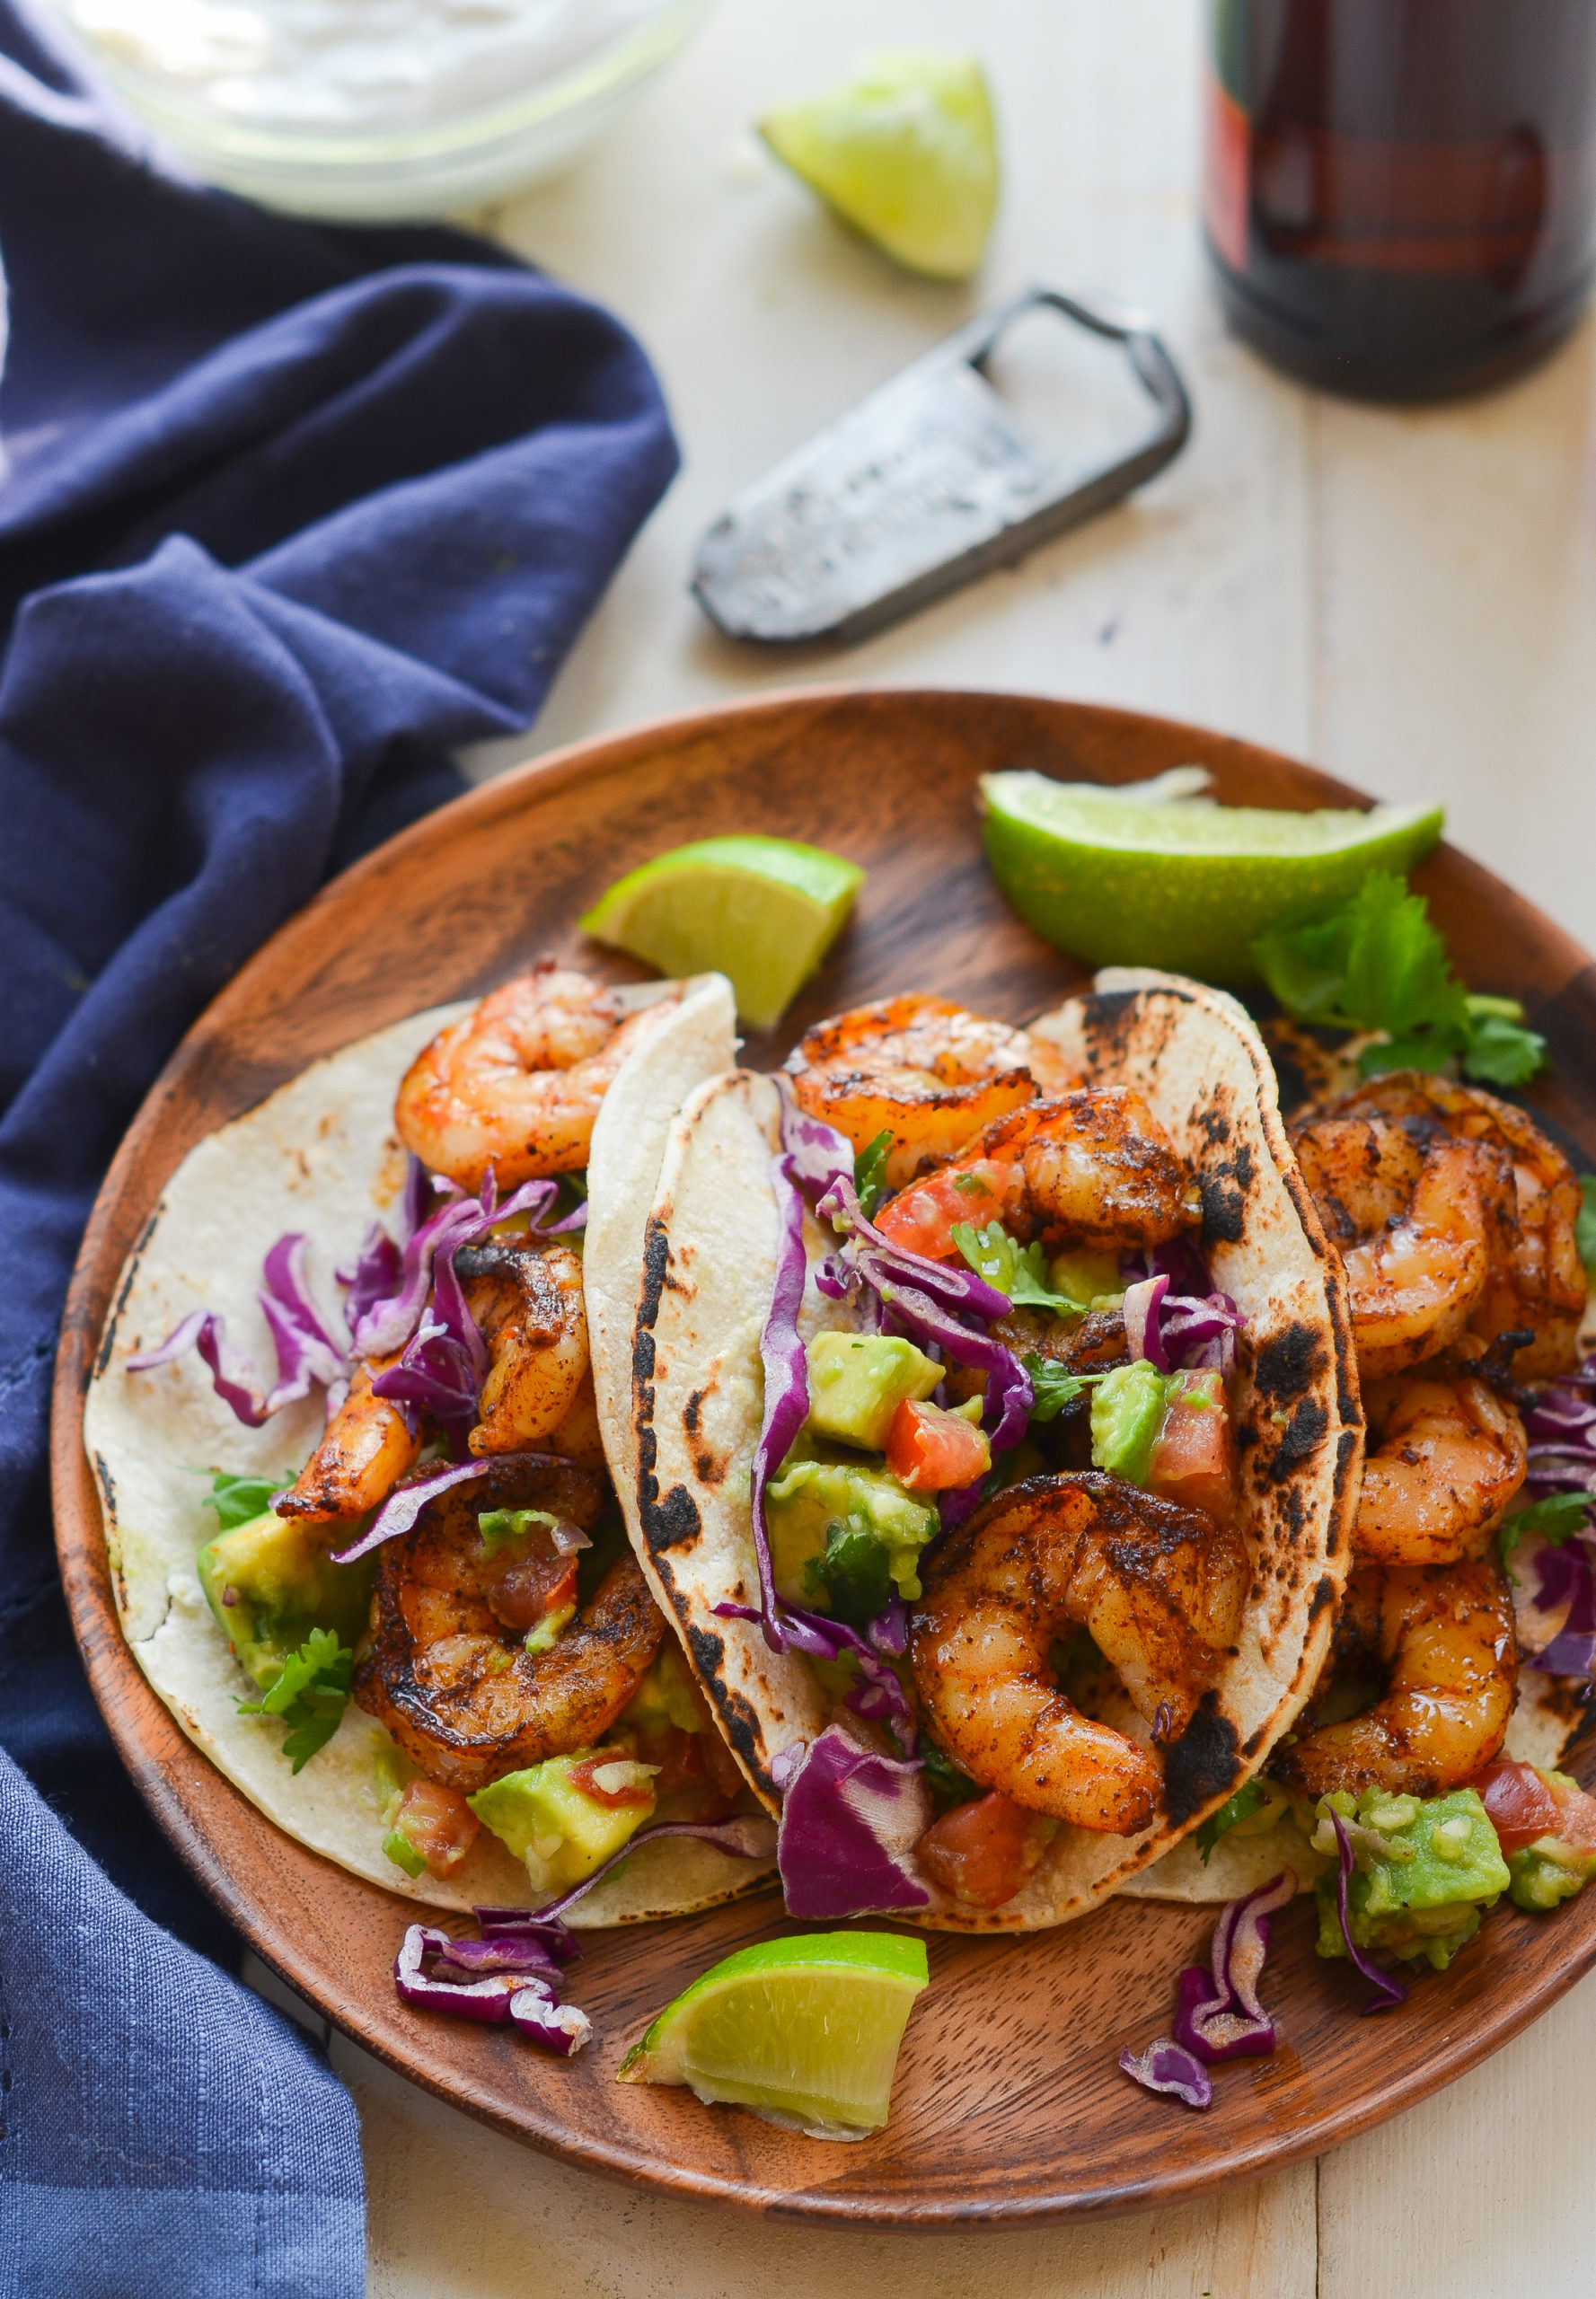 Grilled Shrimp Tacos With Avocado Salsa Once Upon A Chef,Hummingbird Food